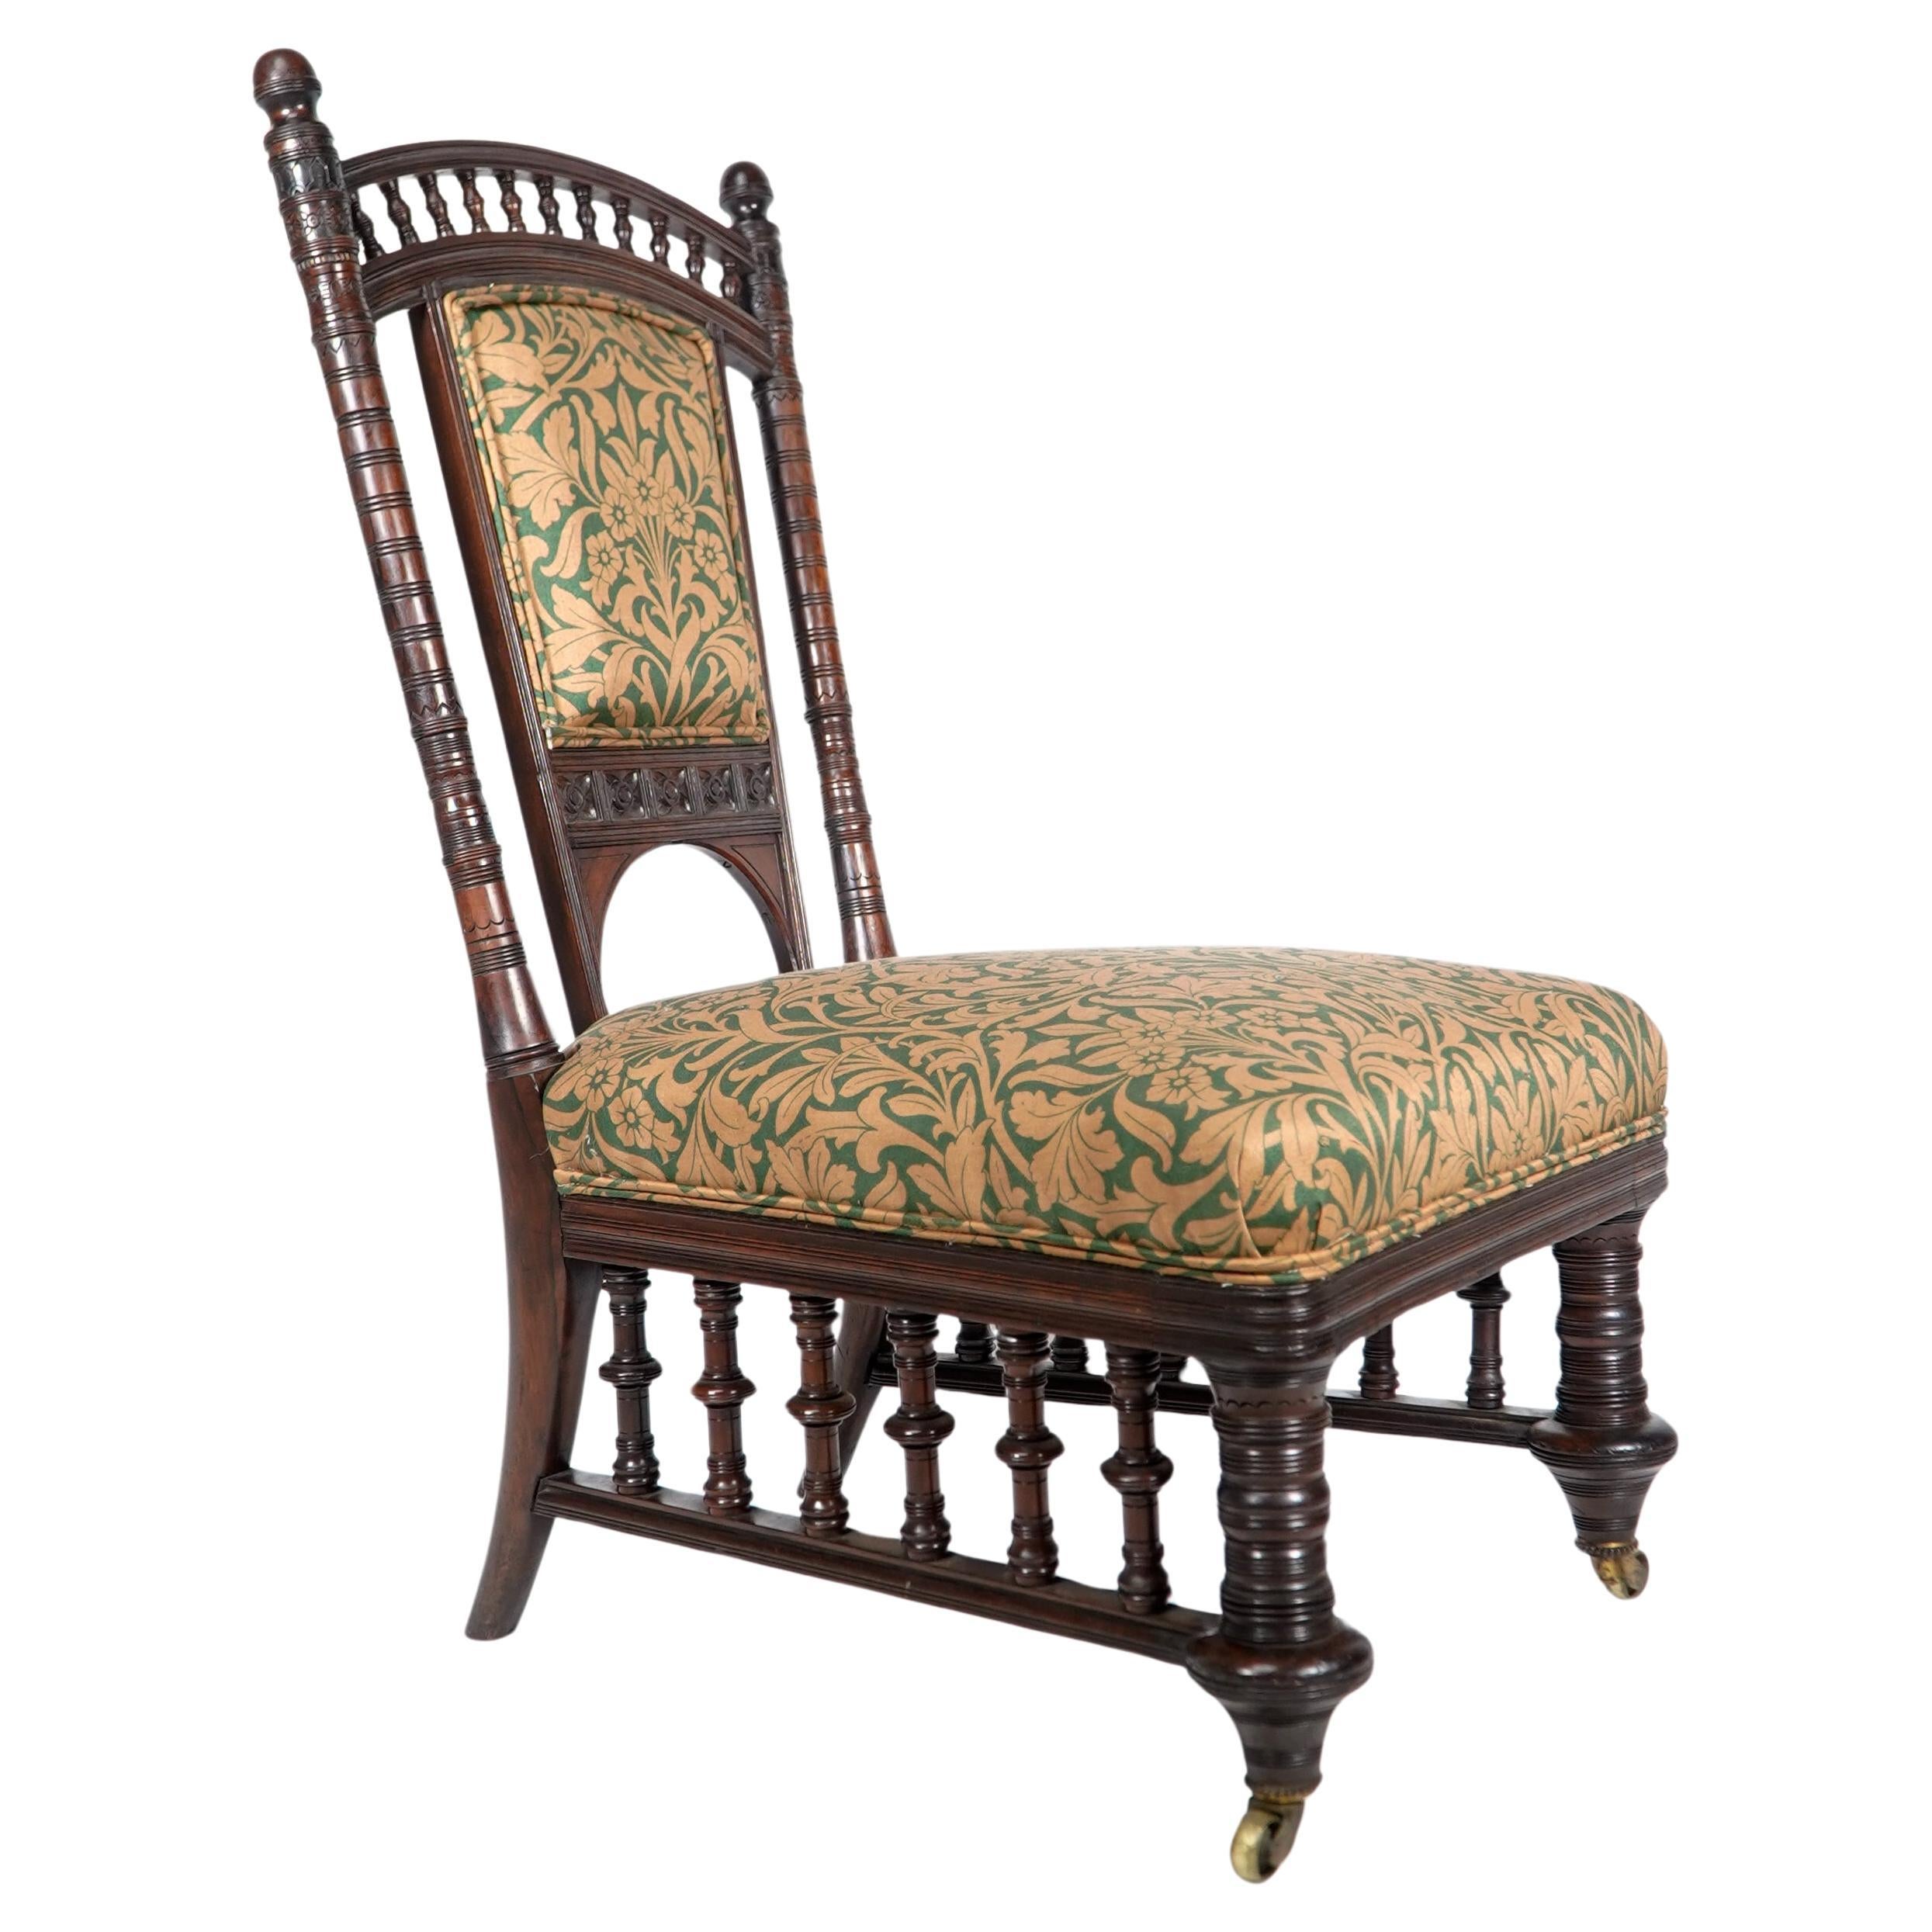 A rare Rosewood side chair with finely carved and turned details